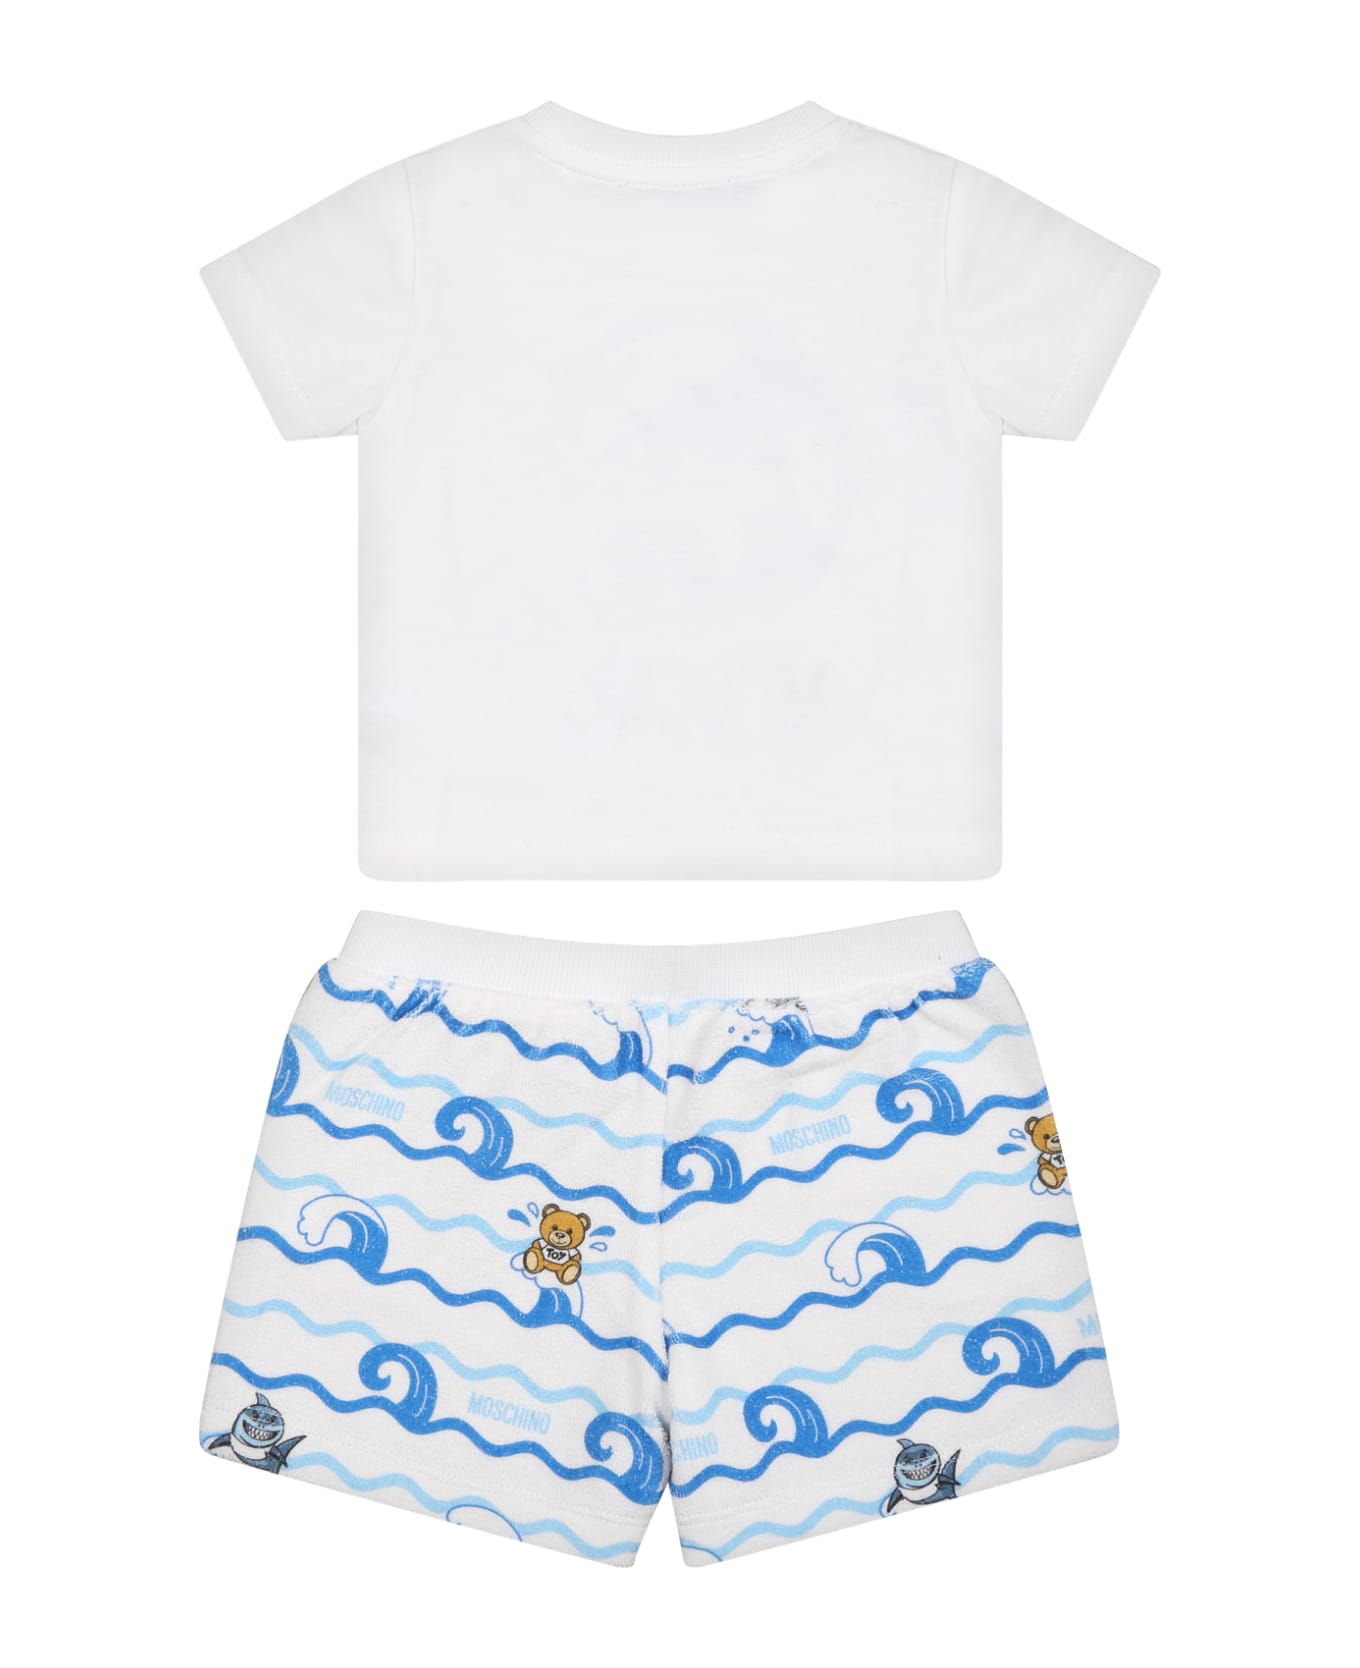 Moschino White Outfit For Baby Boy With Teddy Bear, Logo And Print - White